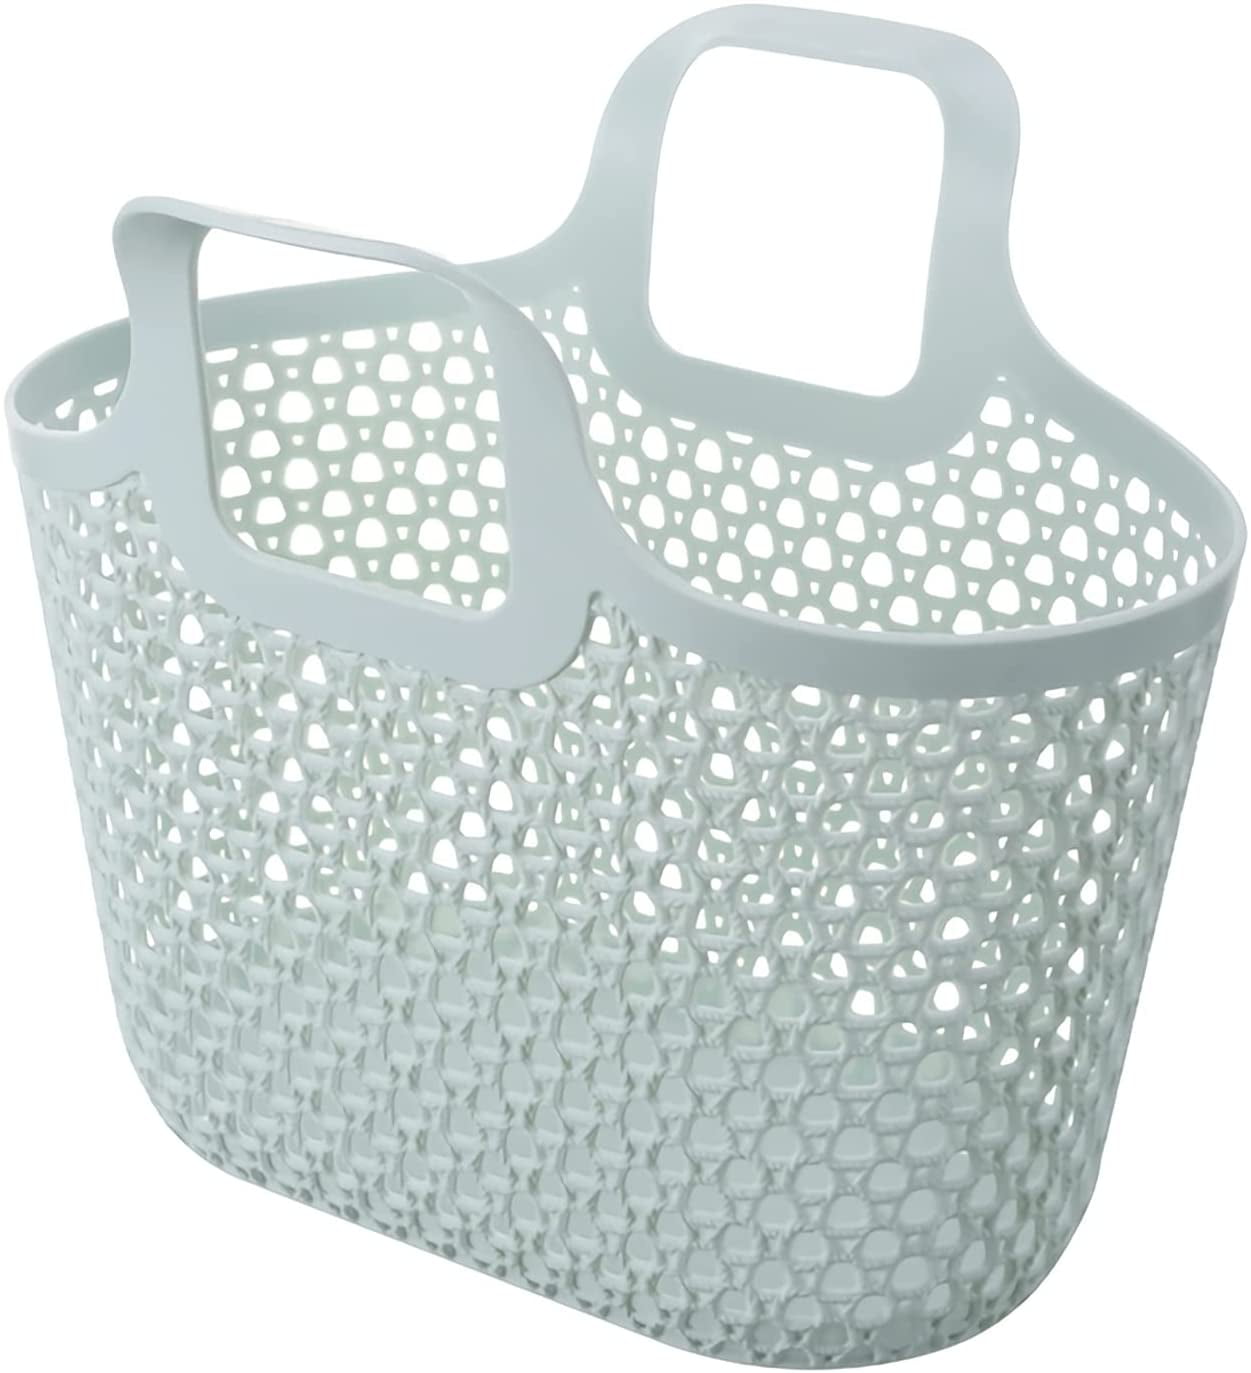 Foeses White Plastic Storage Organizer Basket with Handles, Shower Caddy Tote Portable Storage Bins for Bathroom, Dorm, Kitchen, Bedroom, Size: Small